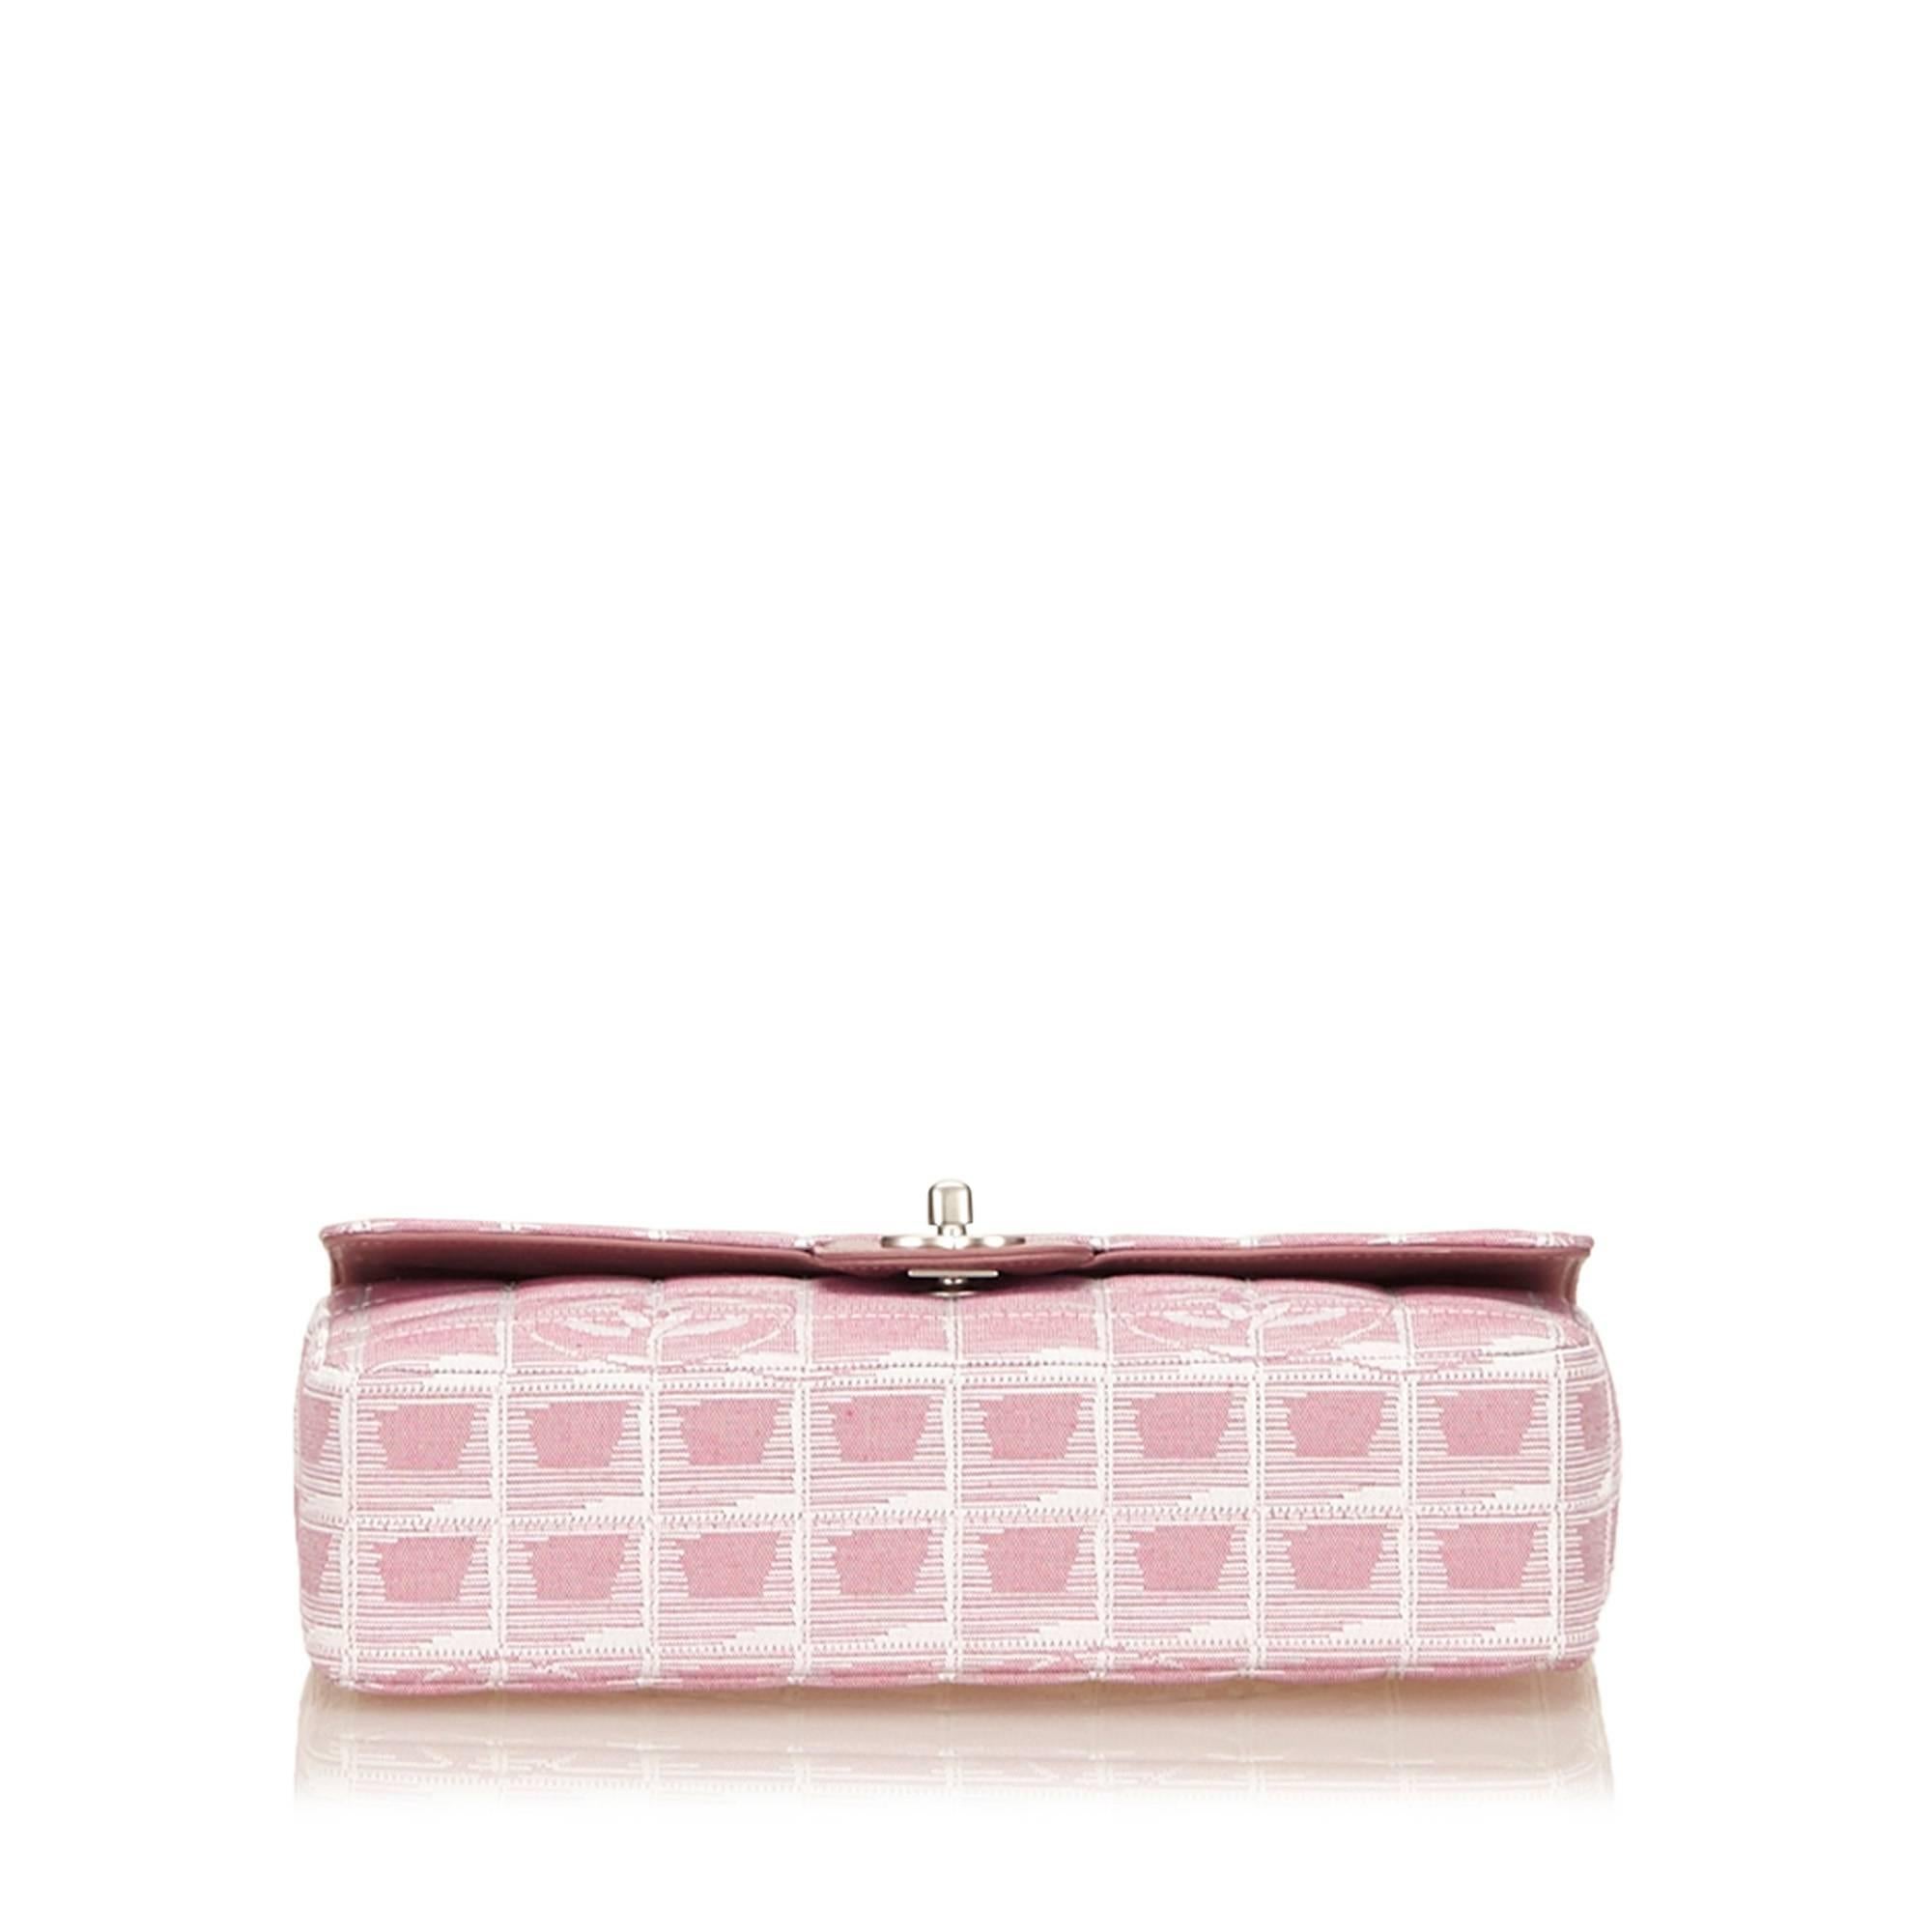 This shoulder bag features a quilted canvas body, silver-tone shoulder chains, an exterior slip pocket, a front flap with interlocking Cs and a twist lock closure, and interior slip and zip pockets.

Color: Pink